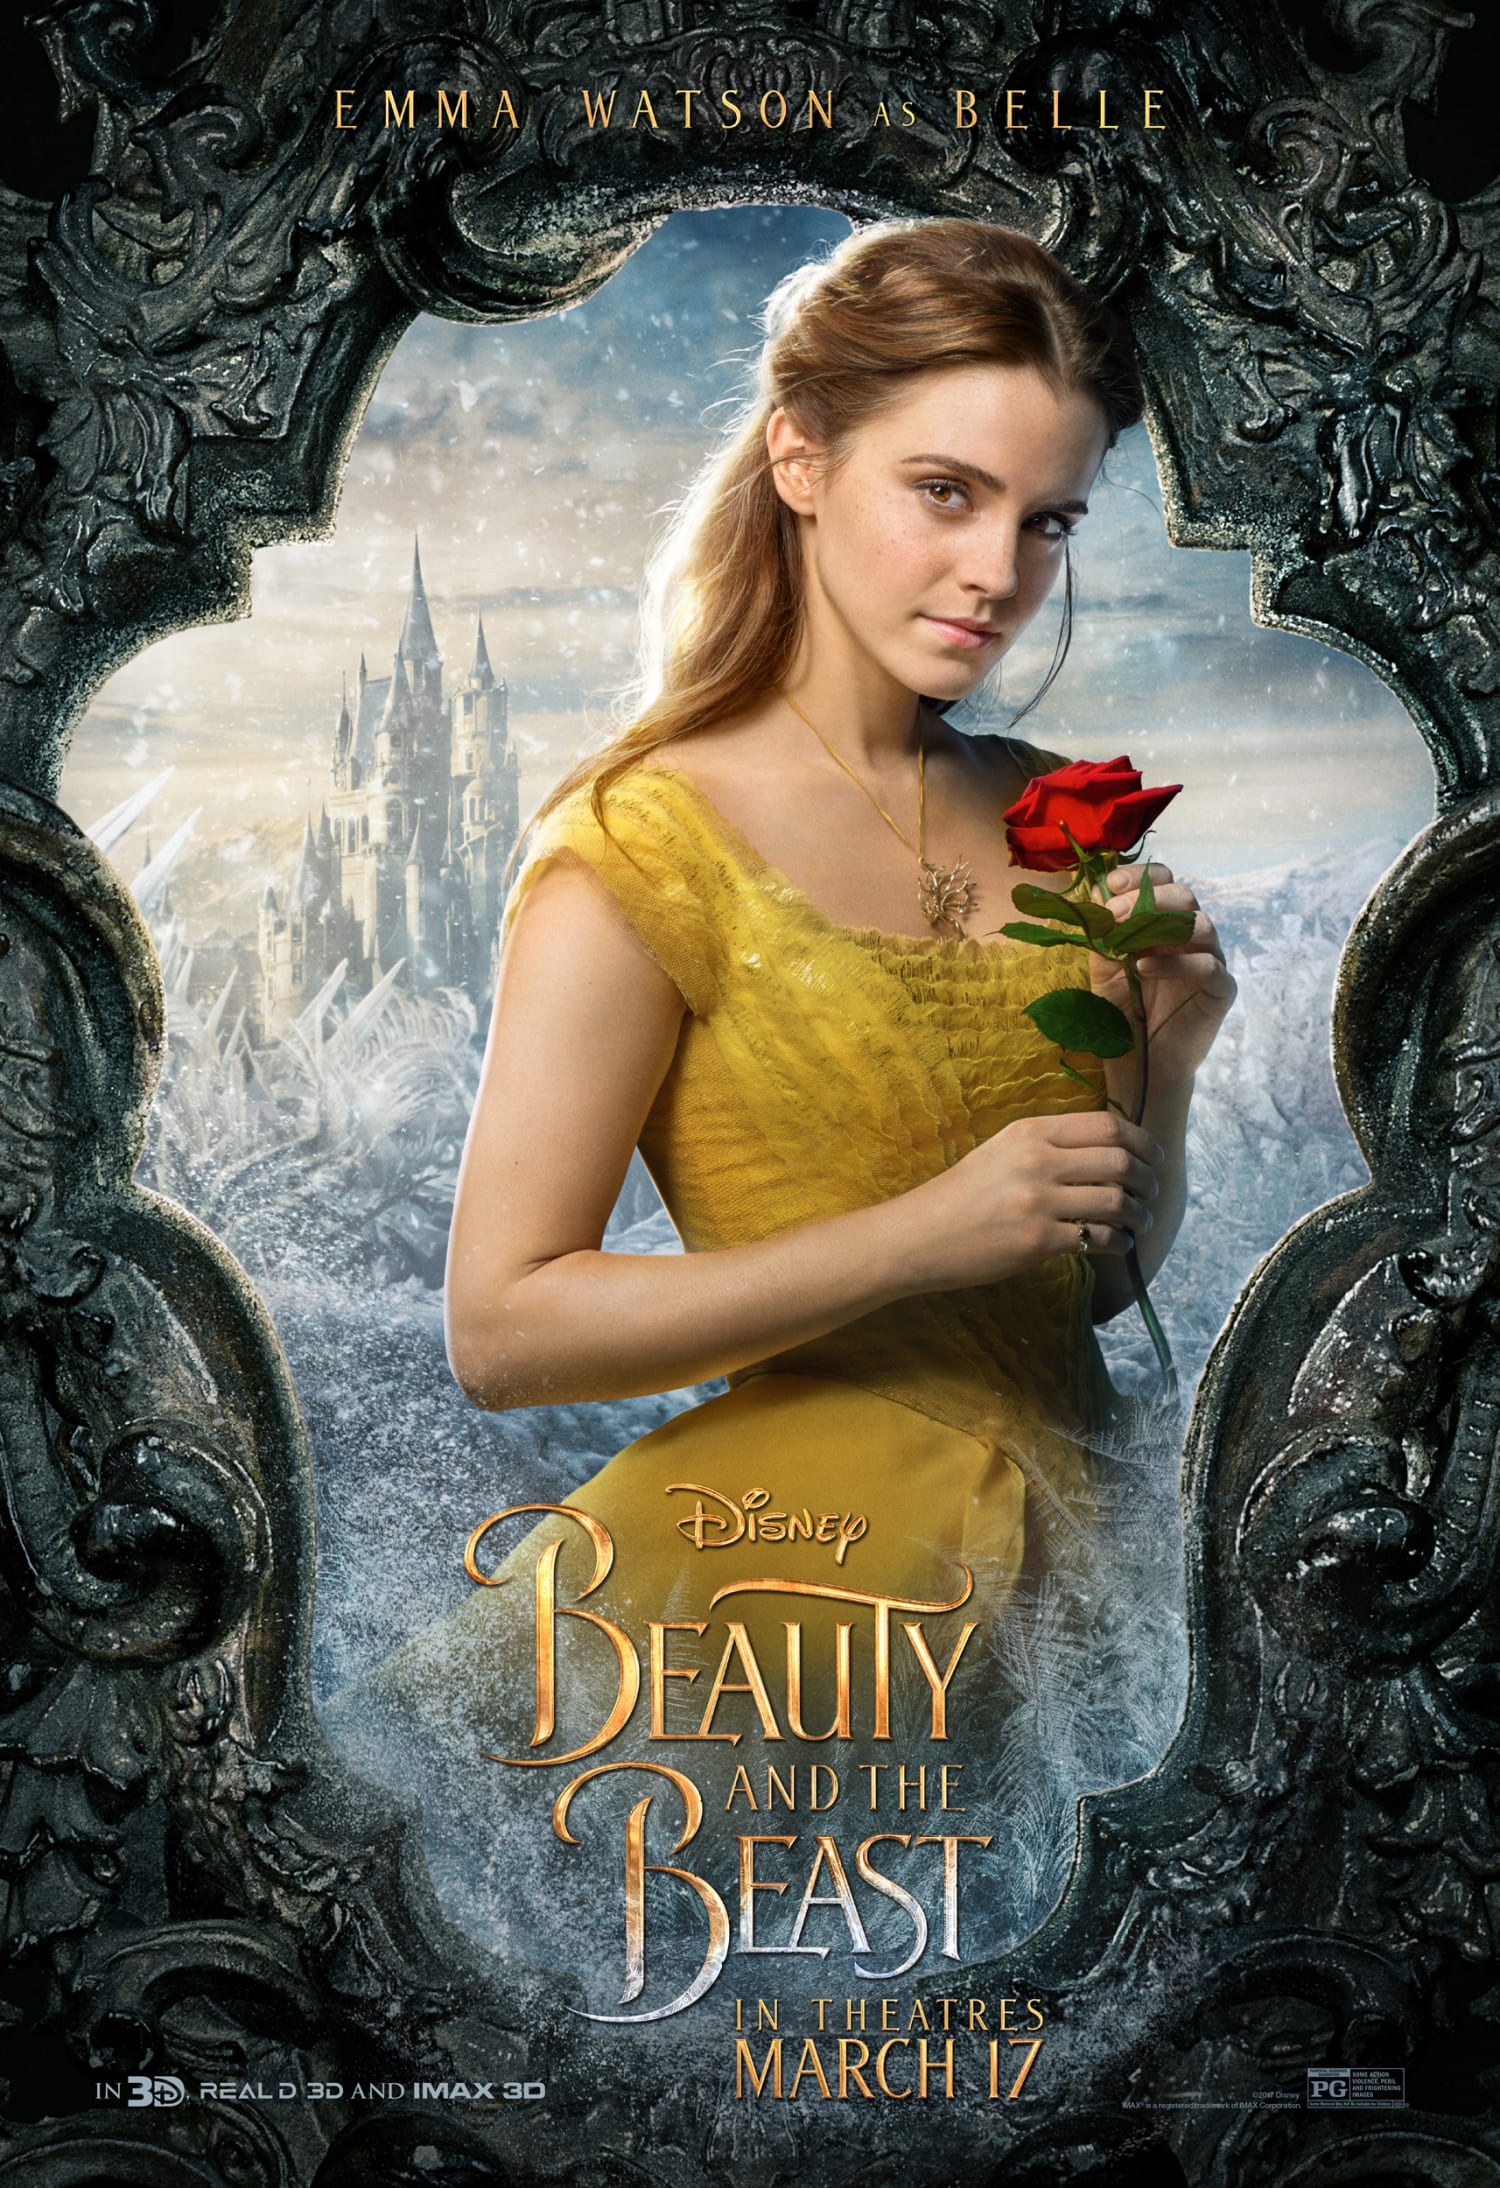 Watch As Beauty And The Beast Cast Takes You Behind The Scenes In New Video